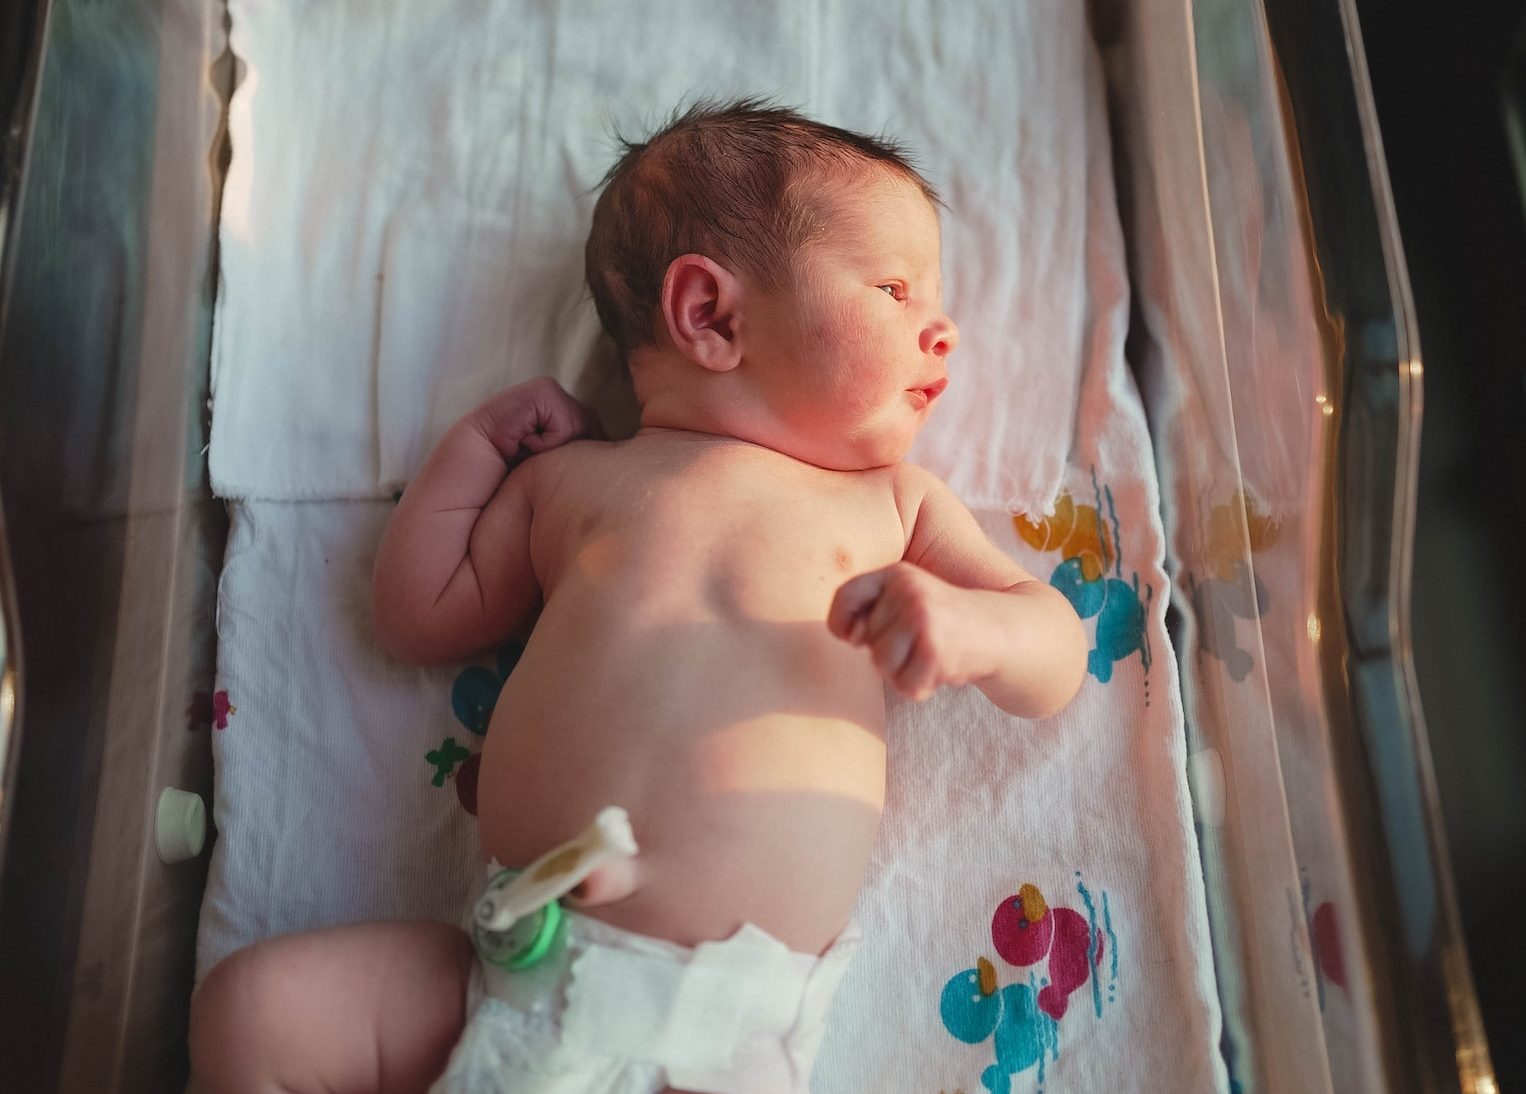 Changing Newborn Diapers: Umbilical Cord Care